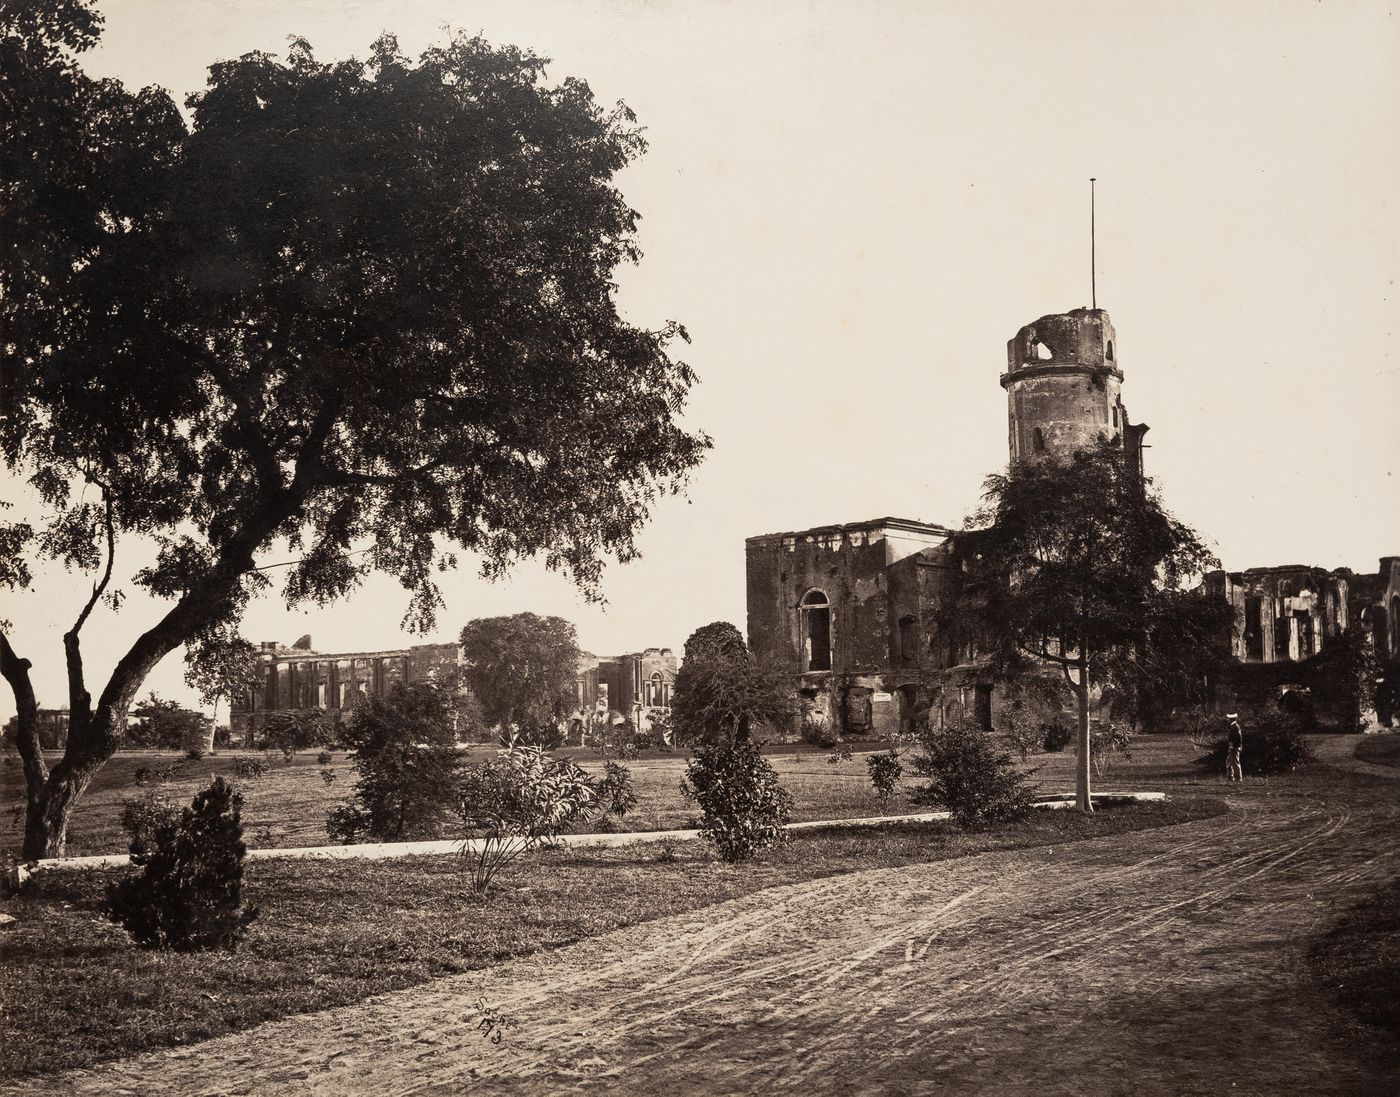 View of the ruins of the Residency Complex, Lucknow, India